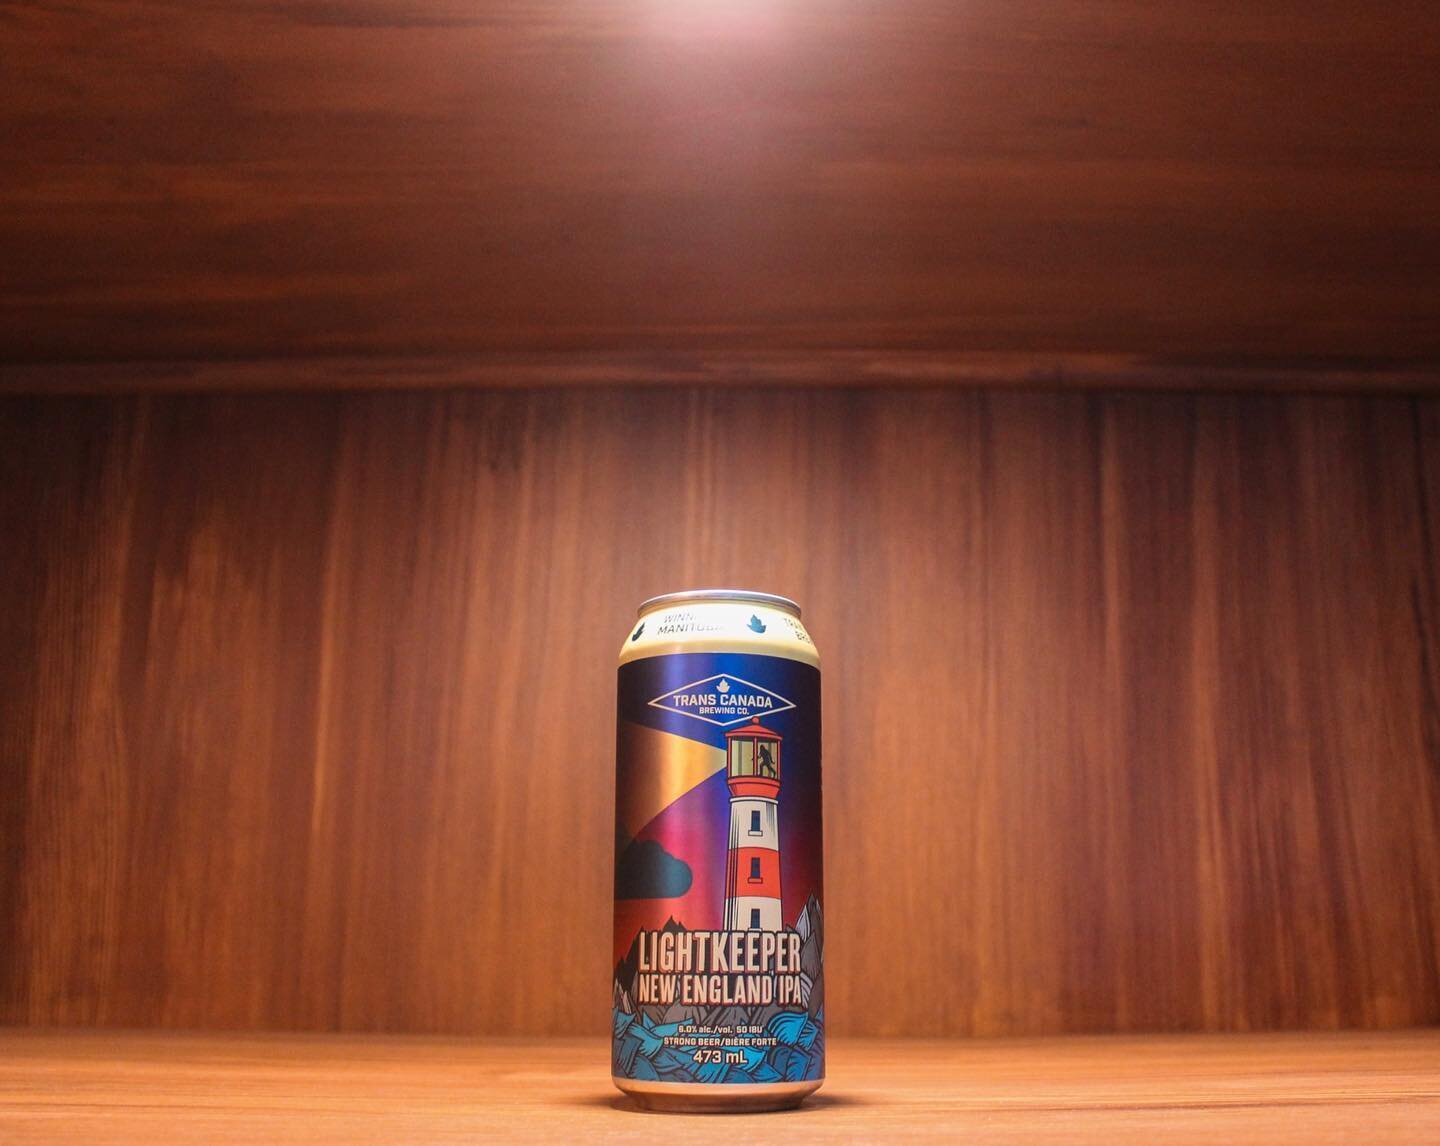 Shining a light on the newest in our hops series, Lightkeeper New England IPA🔦

Intensely dry-hopped, our New England IPA boasts tropical notes of stone fruit and guava while refreshing citrus washes over your palate for a juicy and smooth finish. 
